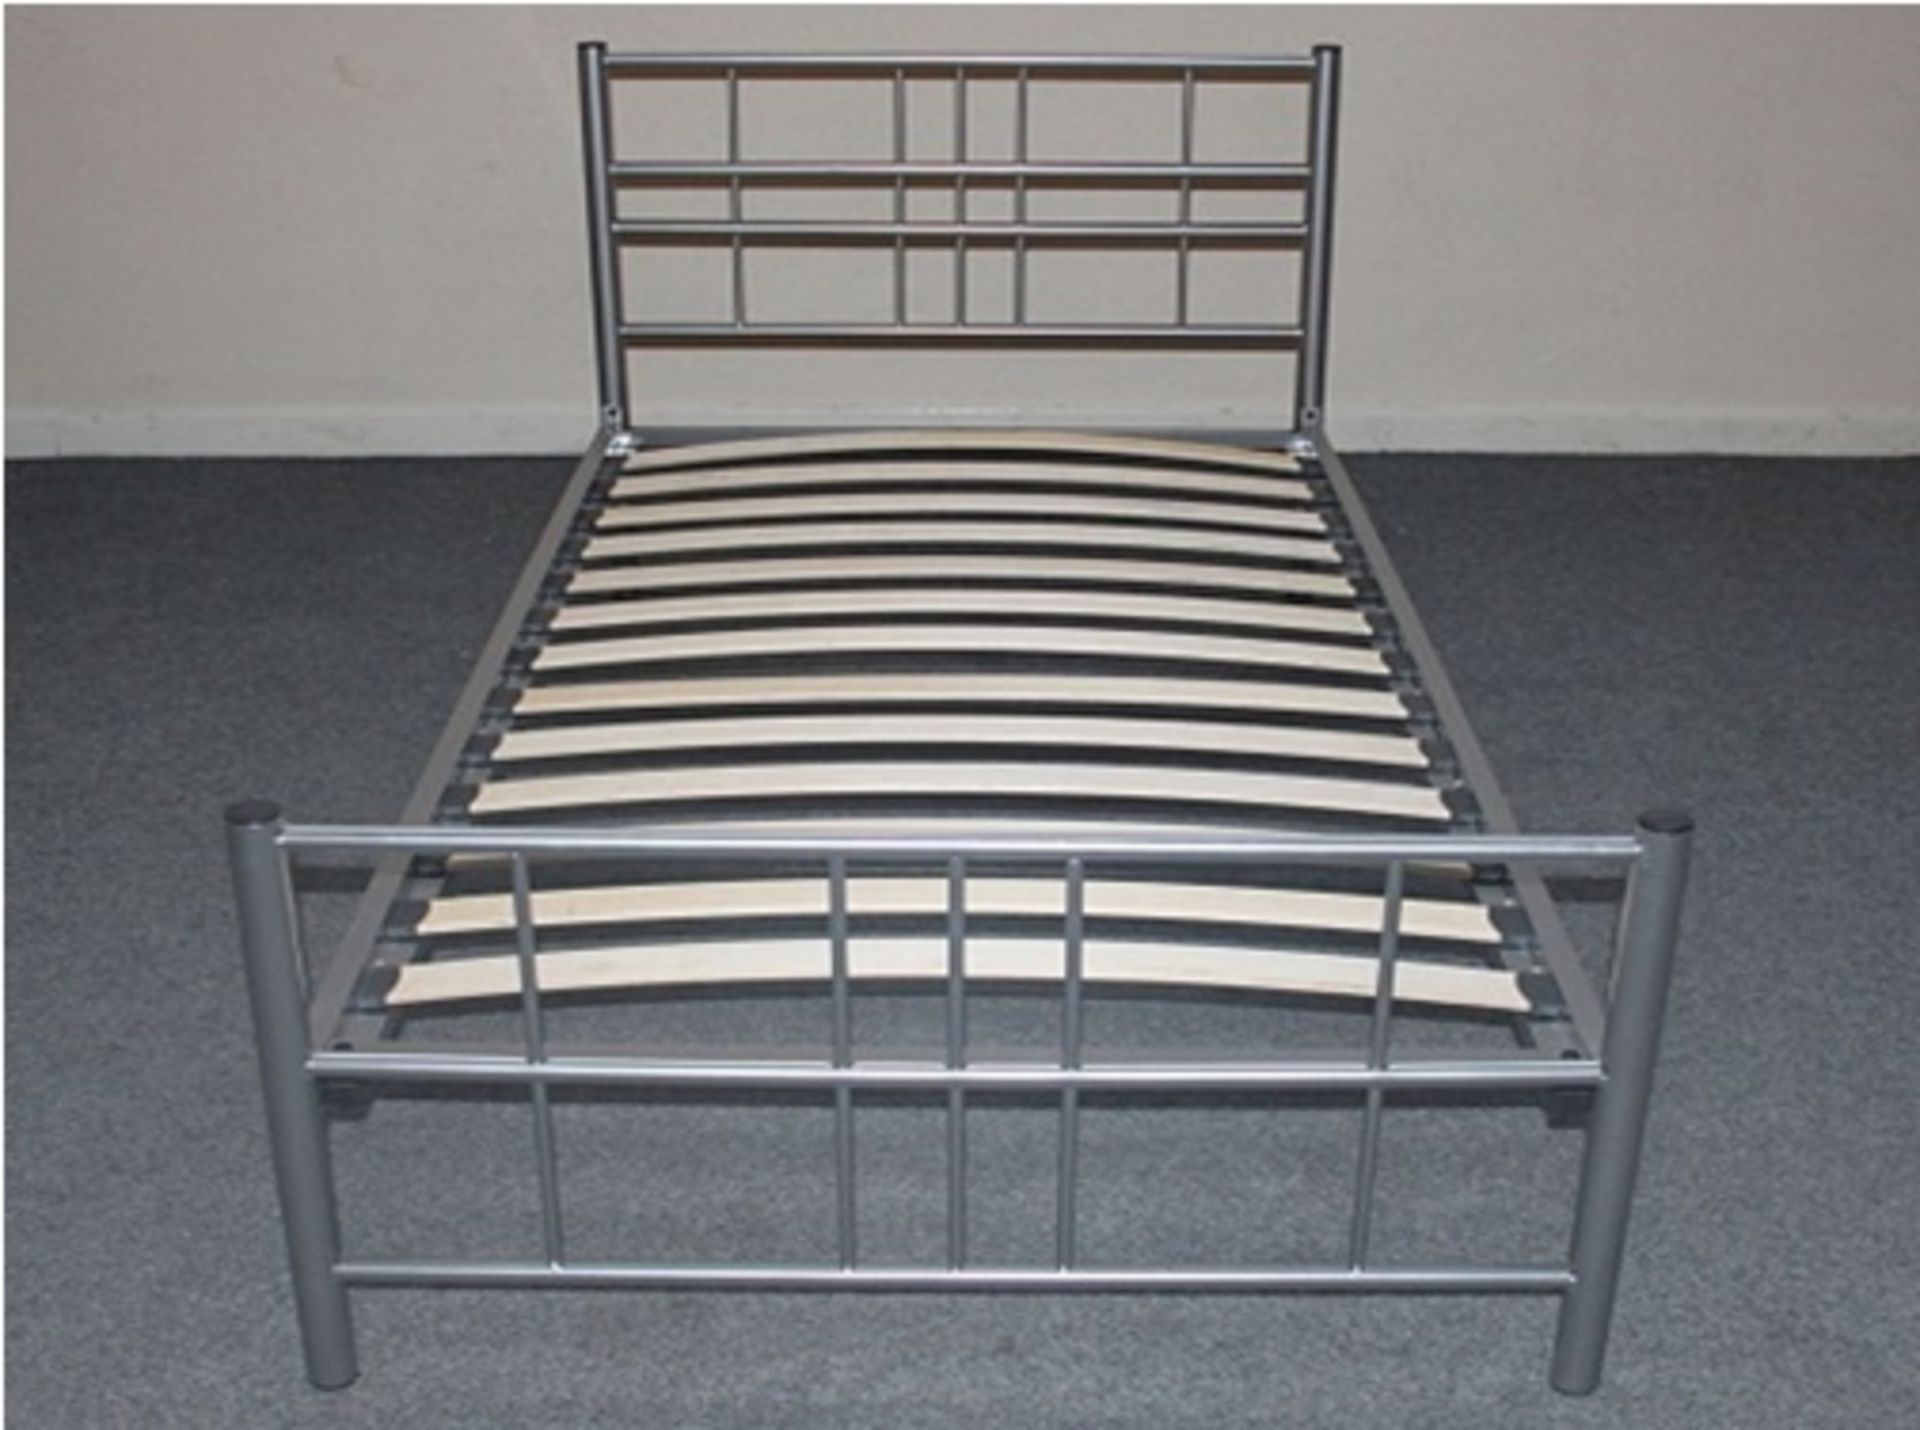 1 x Silver Metal Single Bed (Brand New & Boxed)